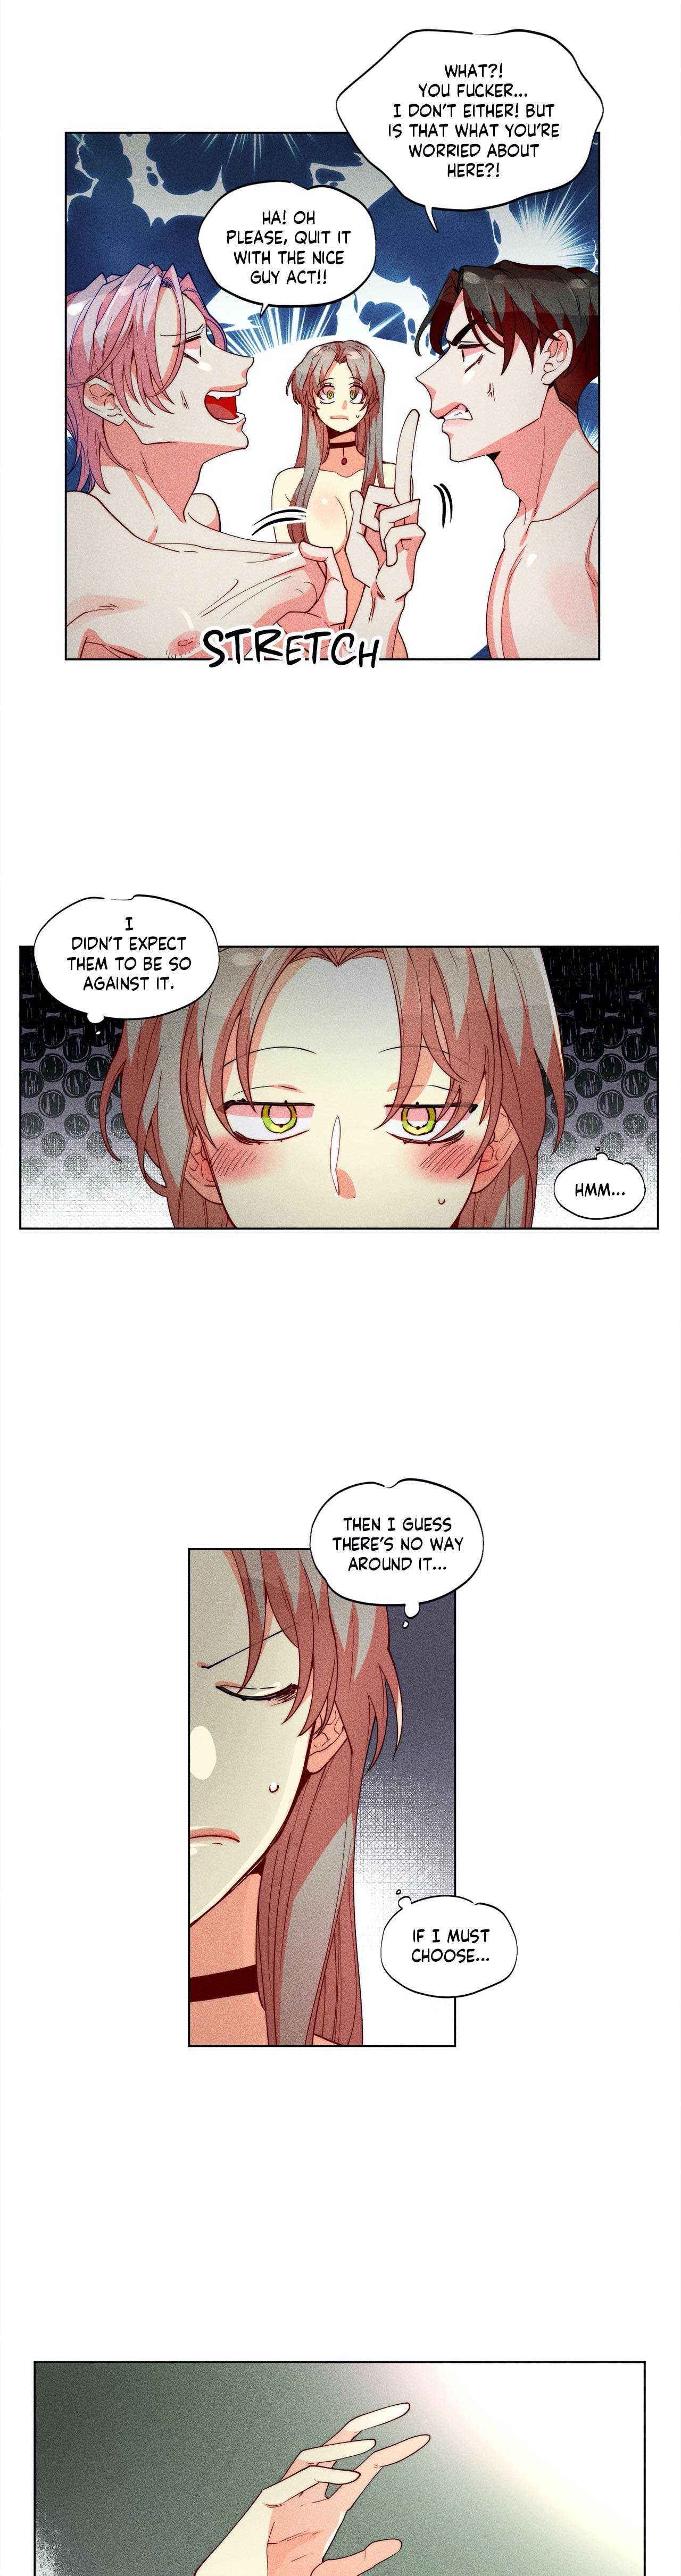 the-virgin-witch-chap-34-4